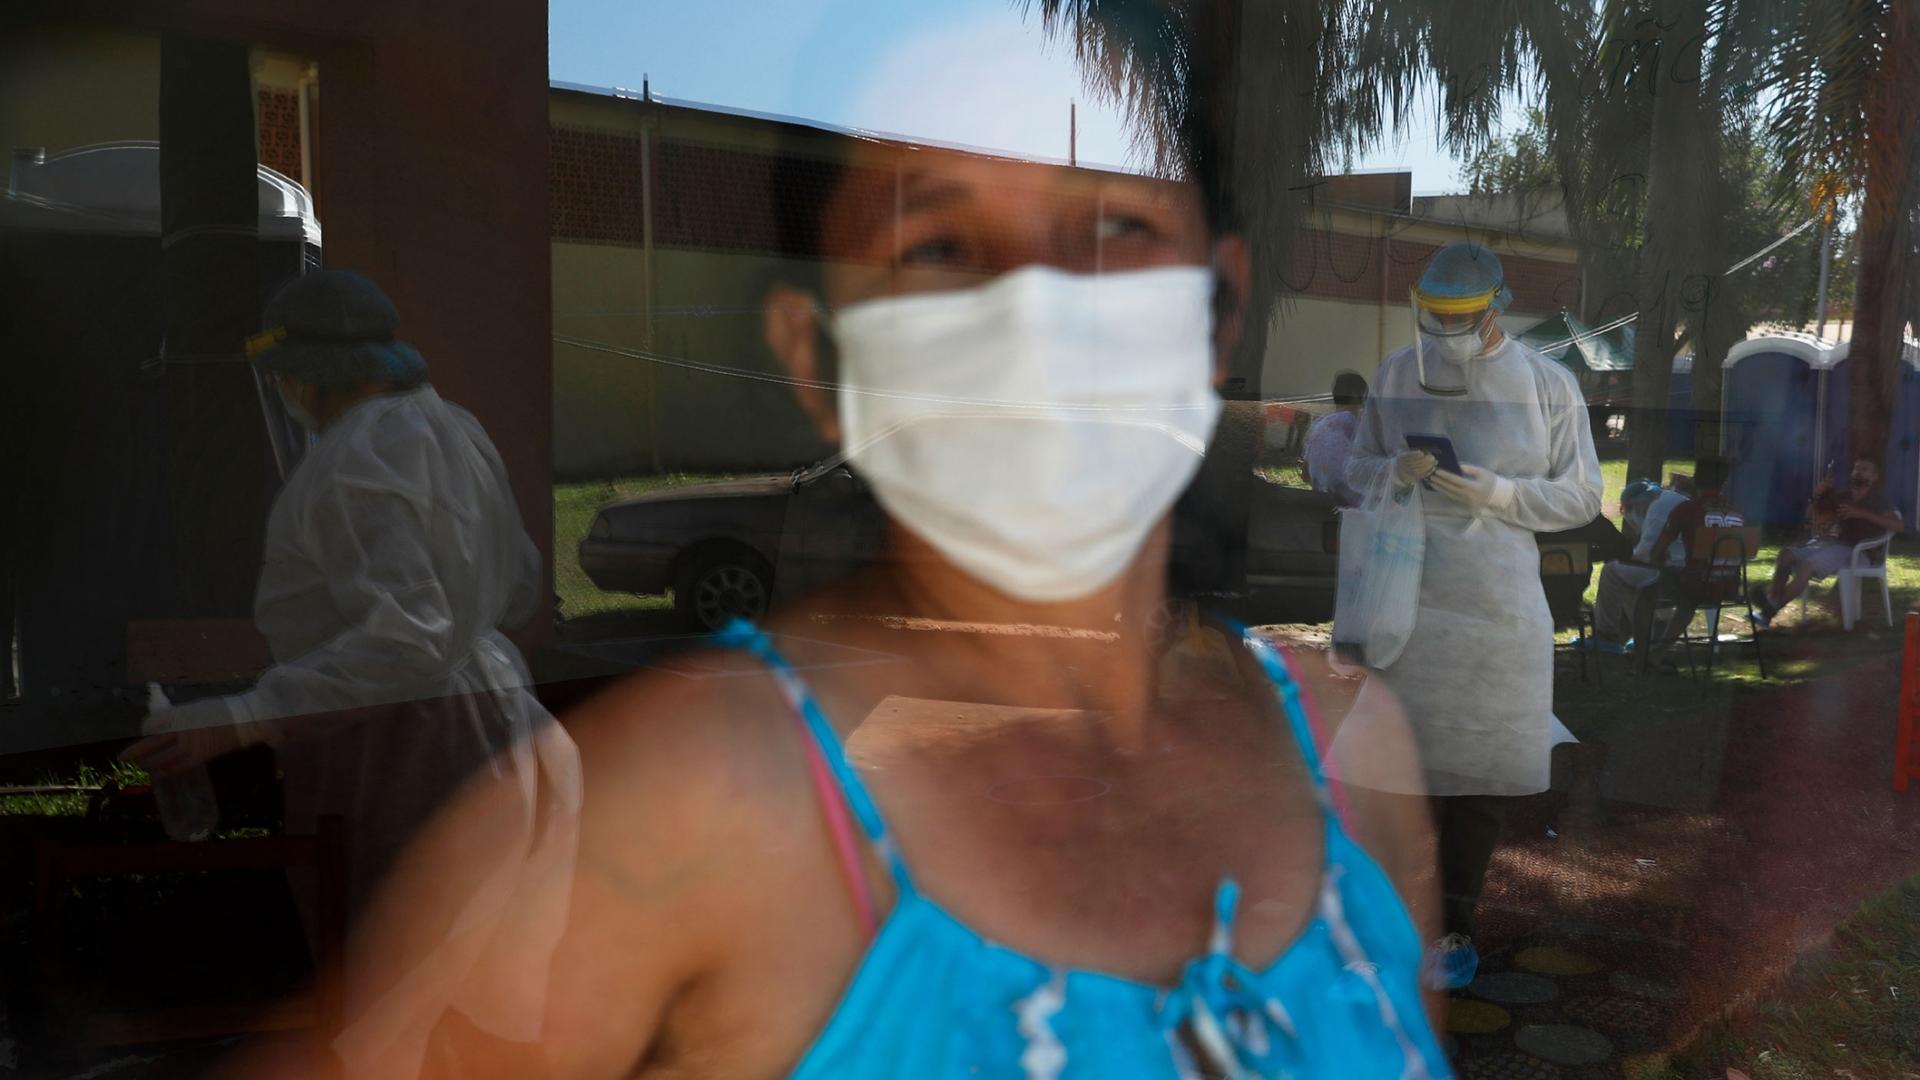 A woman is shown with a face mask and wearing a blue top and looking through glass where several people are shown wearing full medical protective gowns.